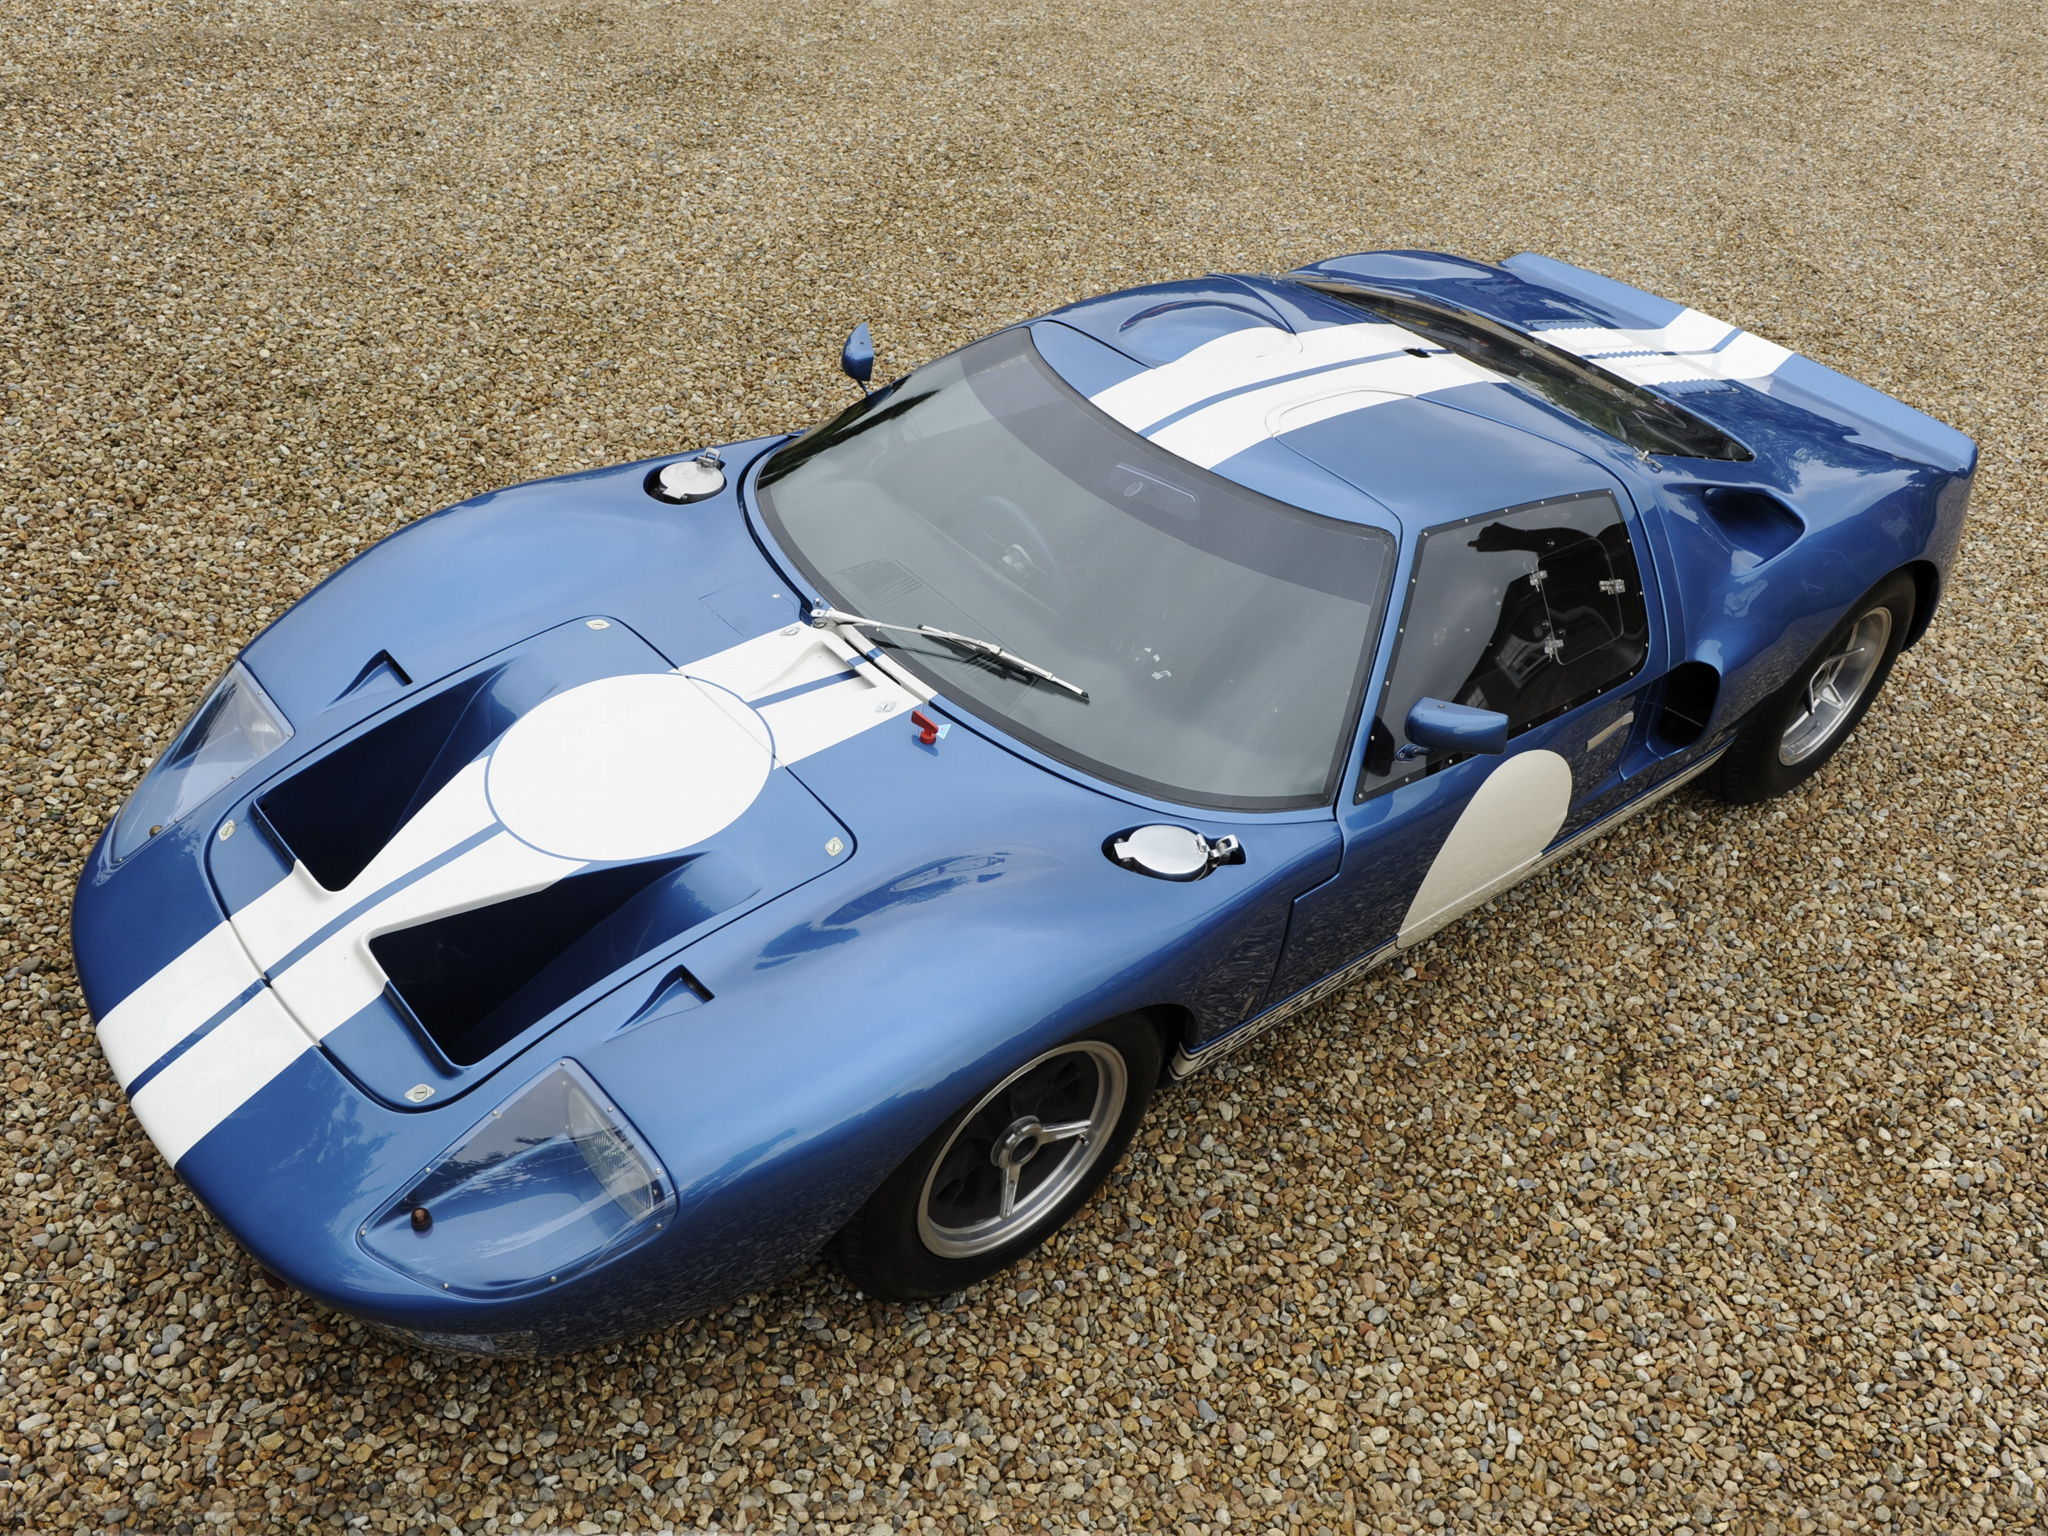 1965, Ford, Gt40, Mkii, Supercar, Race, Racing, Classic, G t, Gd Wallpaper